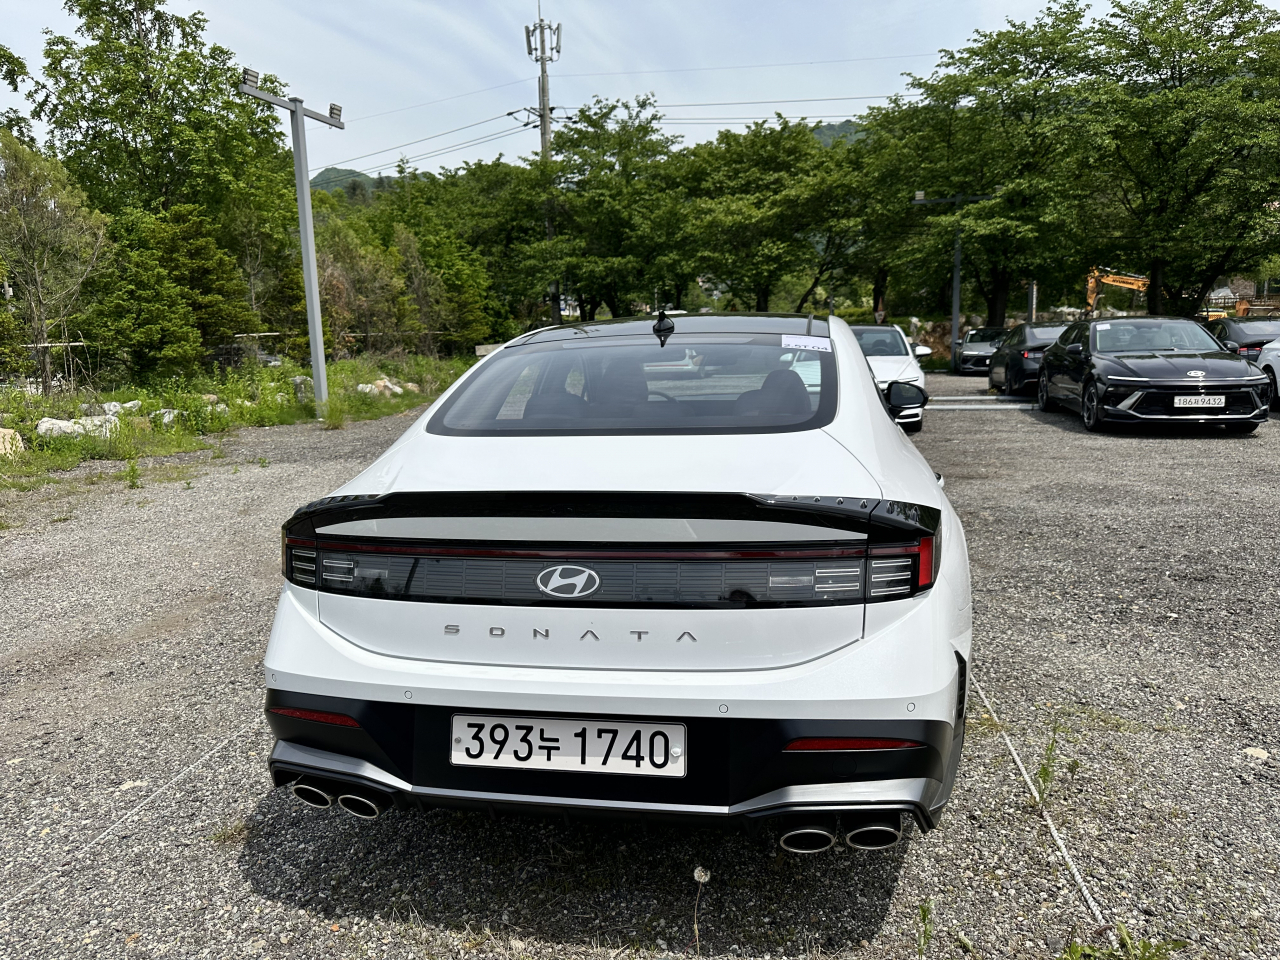 The rear part of Sonata the Edge N Brand with 2.5 gasoline turbo engine (Byun Hye-jin/The Korea Herald)